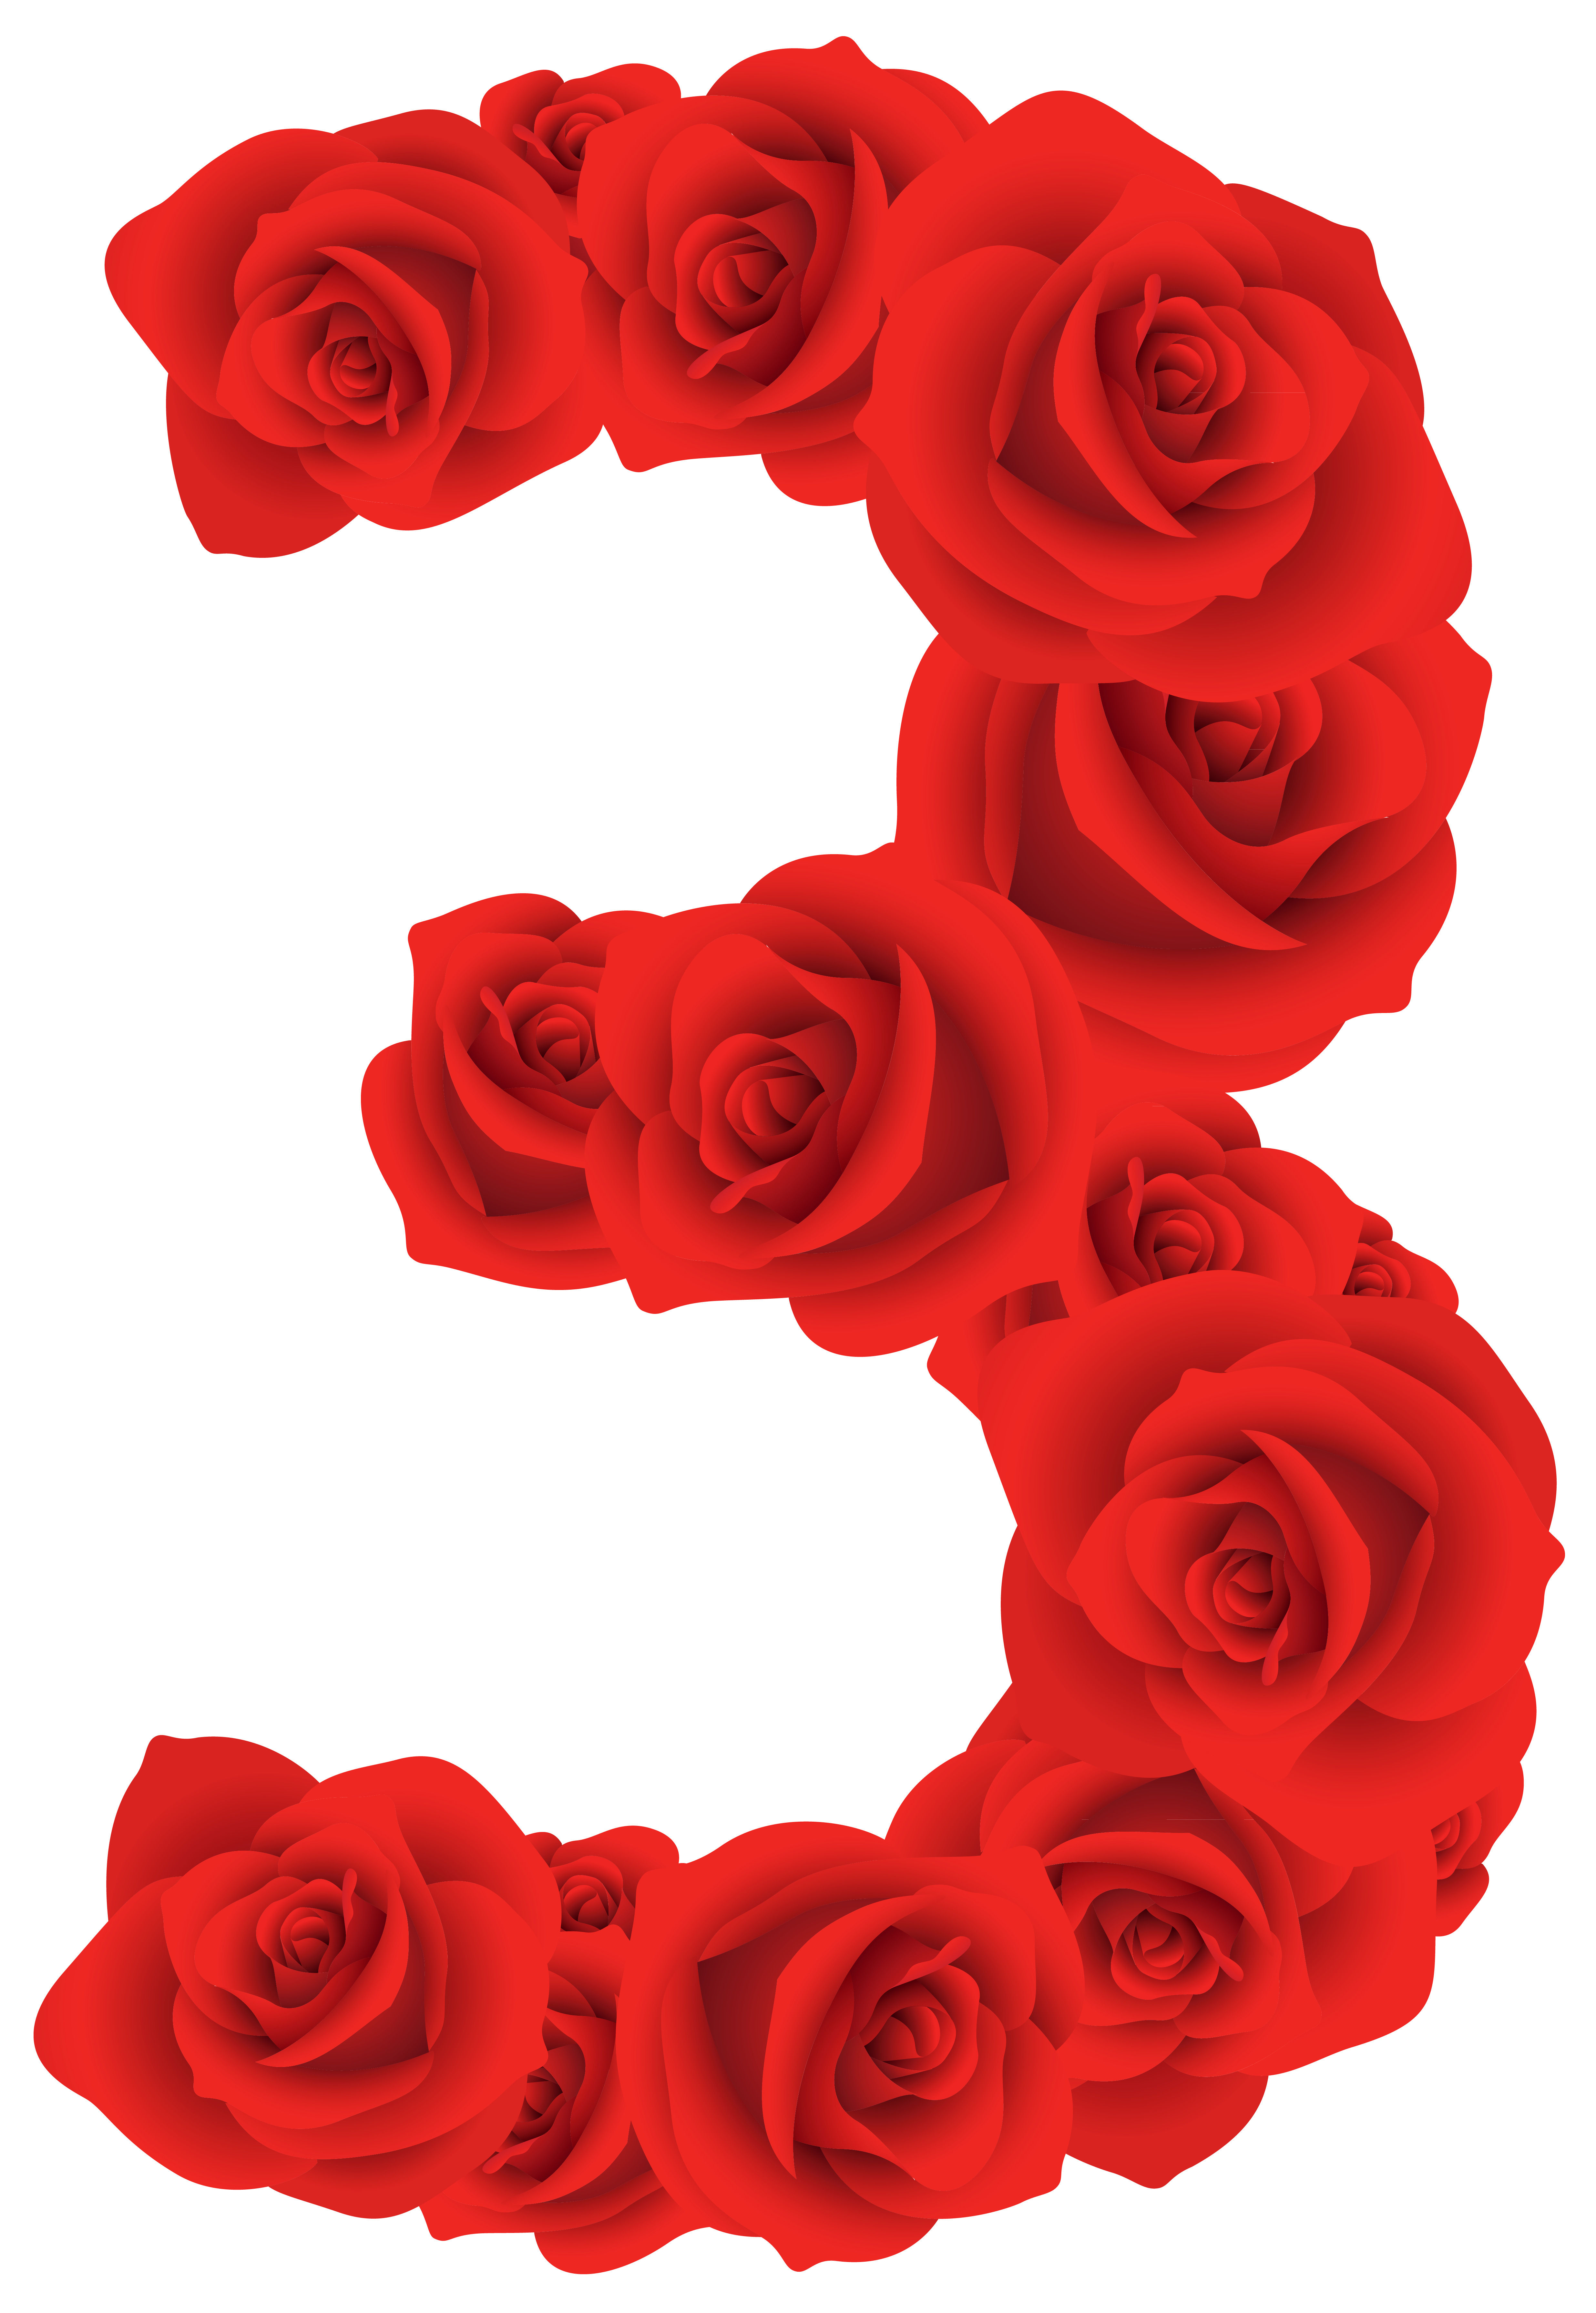 Red Roses Number Three PNG Clipart Image.